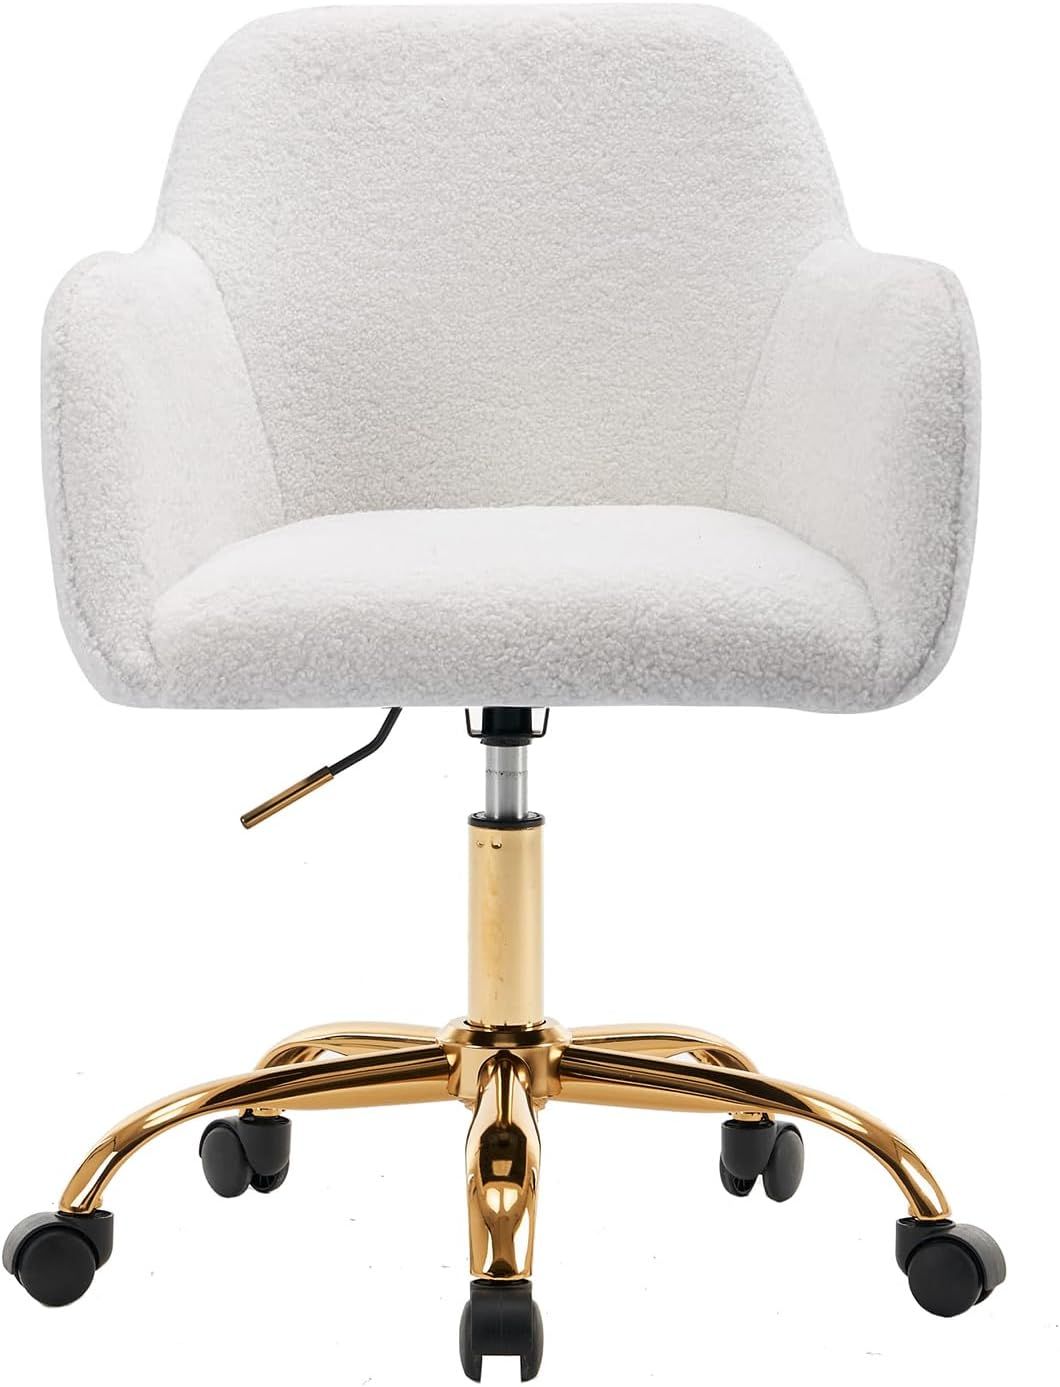 Modern Teddy Home Office Chair, Upholstered Cute Desk Chair with Gold Metal Legs, Adjustable Swiv... | Amazon (US)